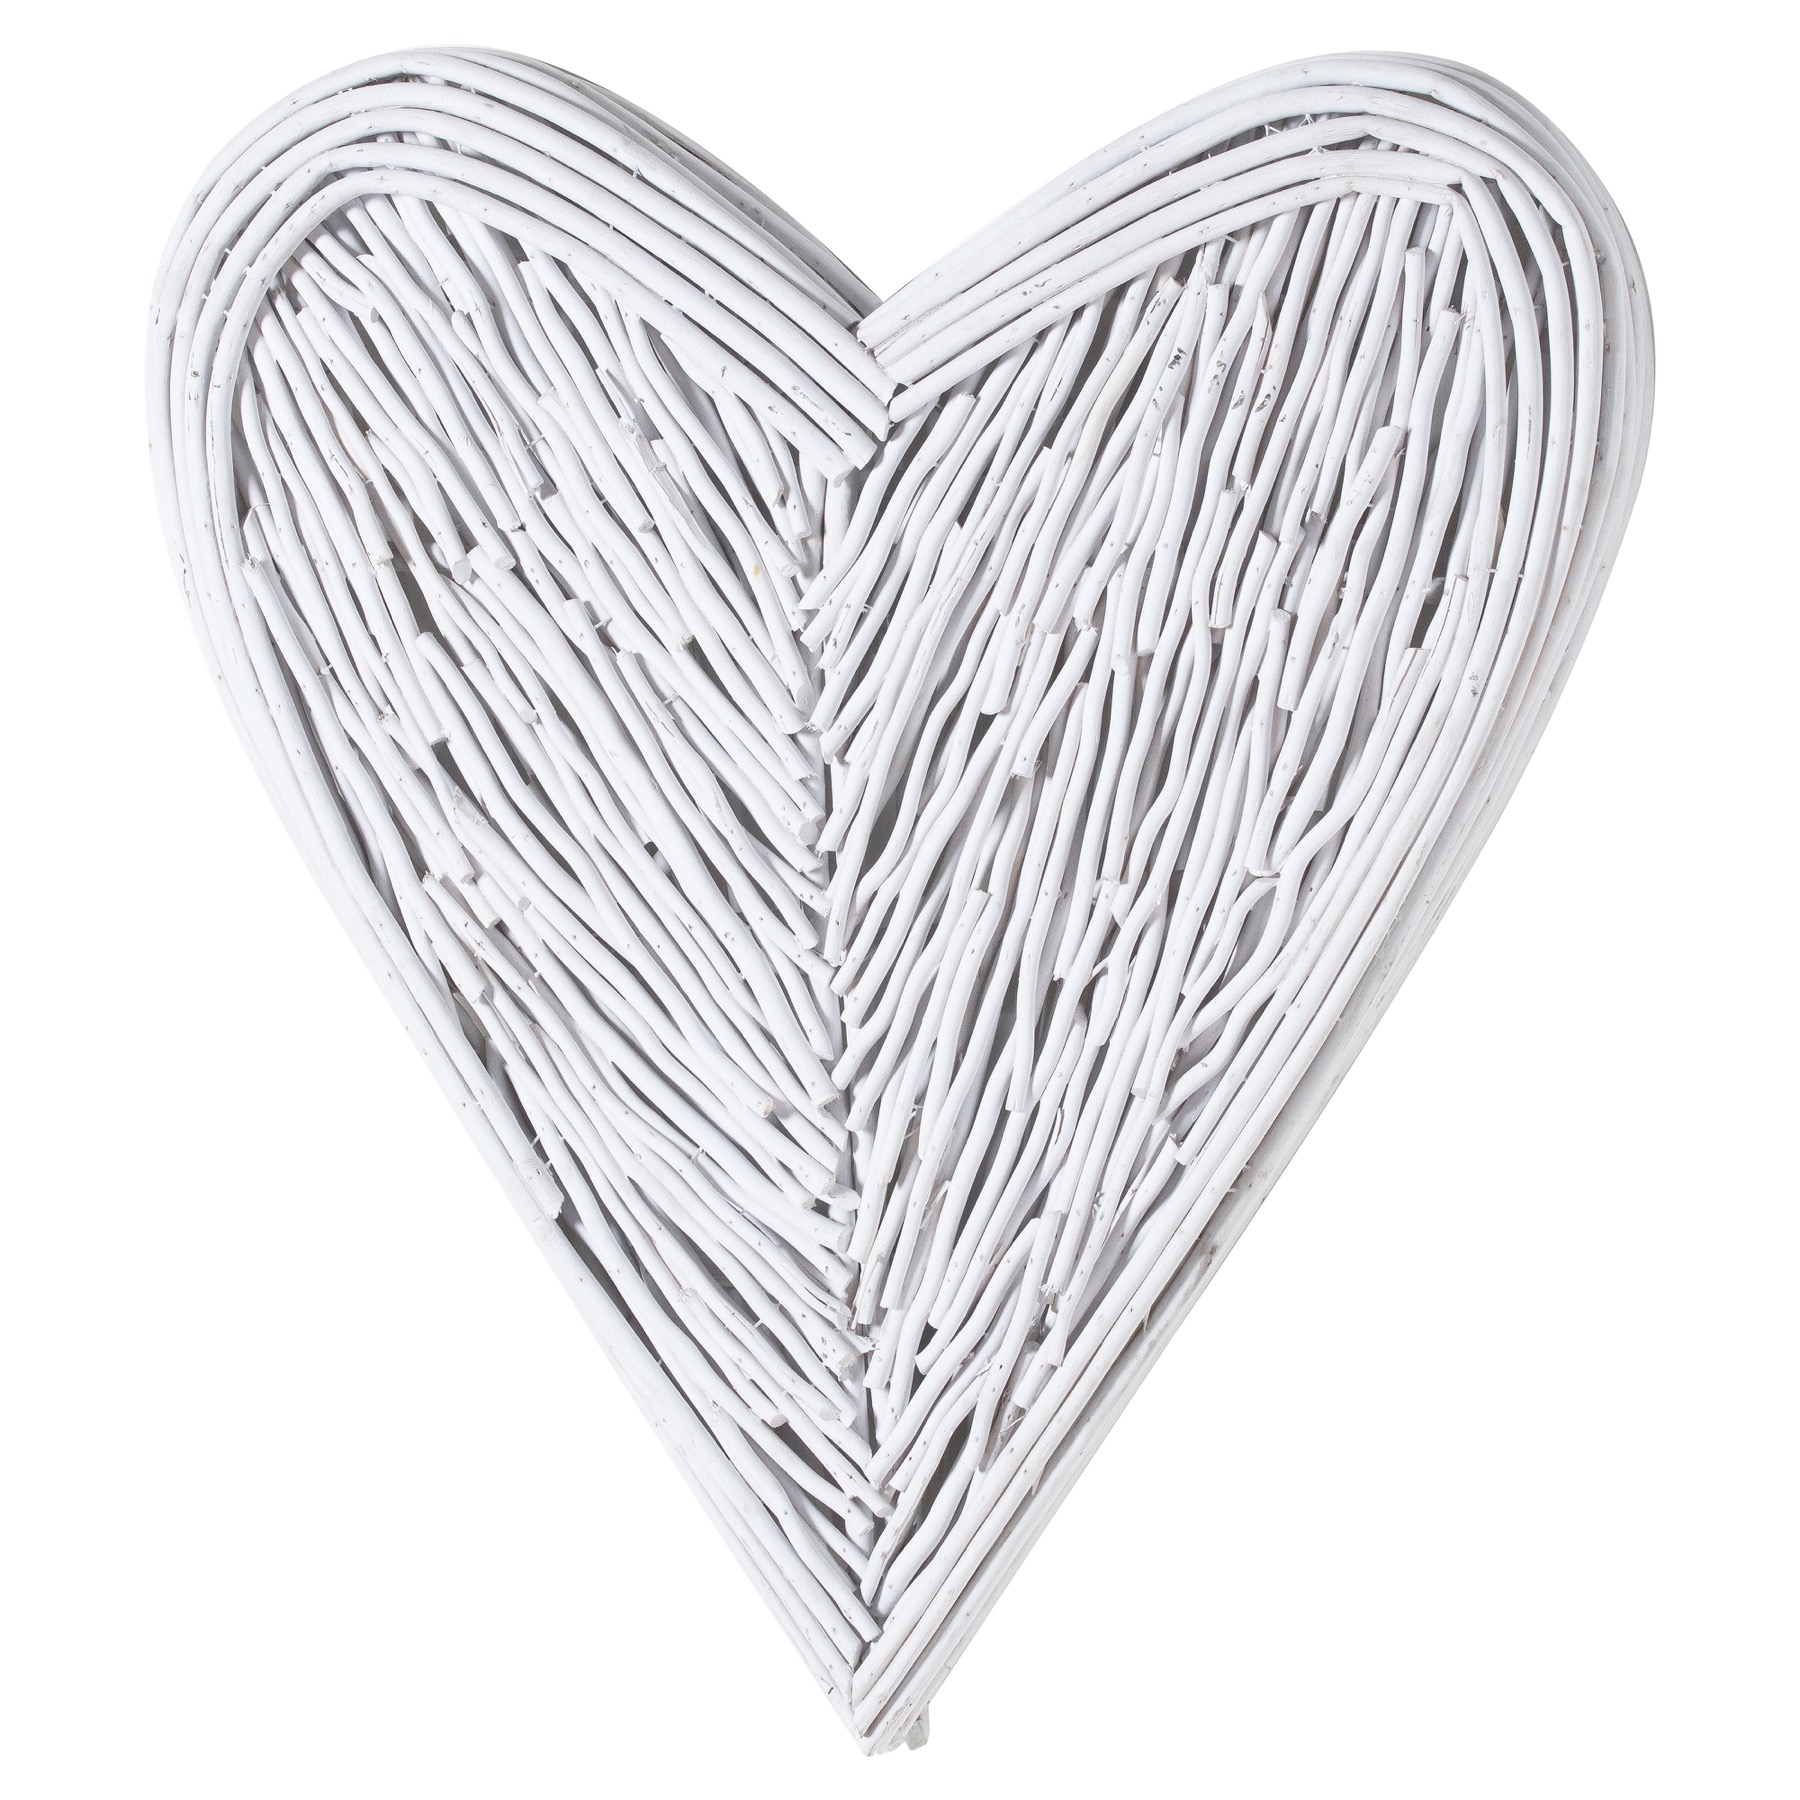 Small White Willow Branch Heart - Image 1